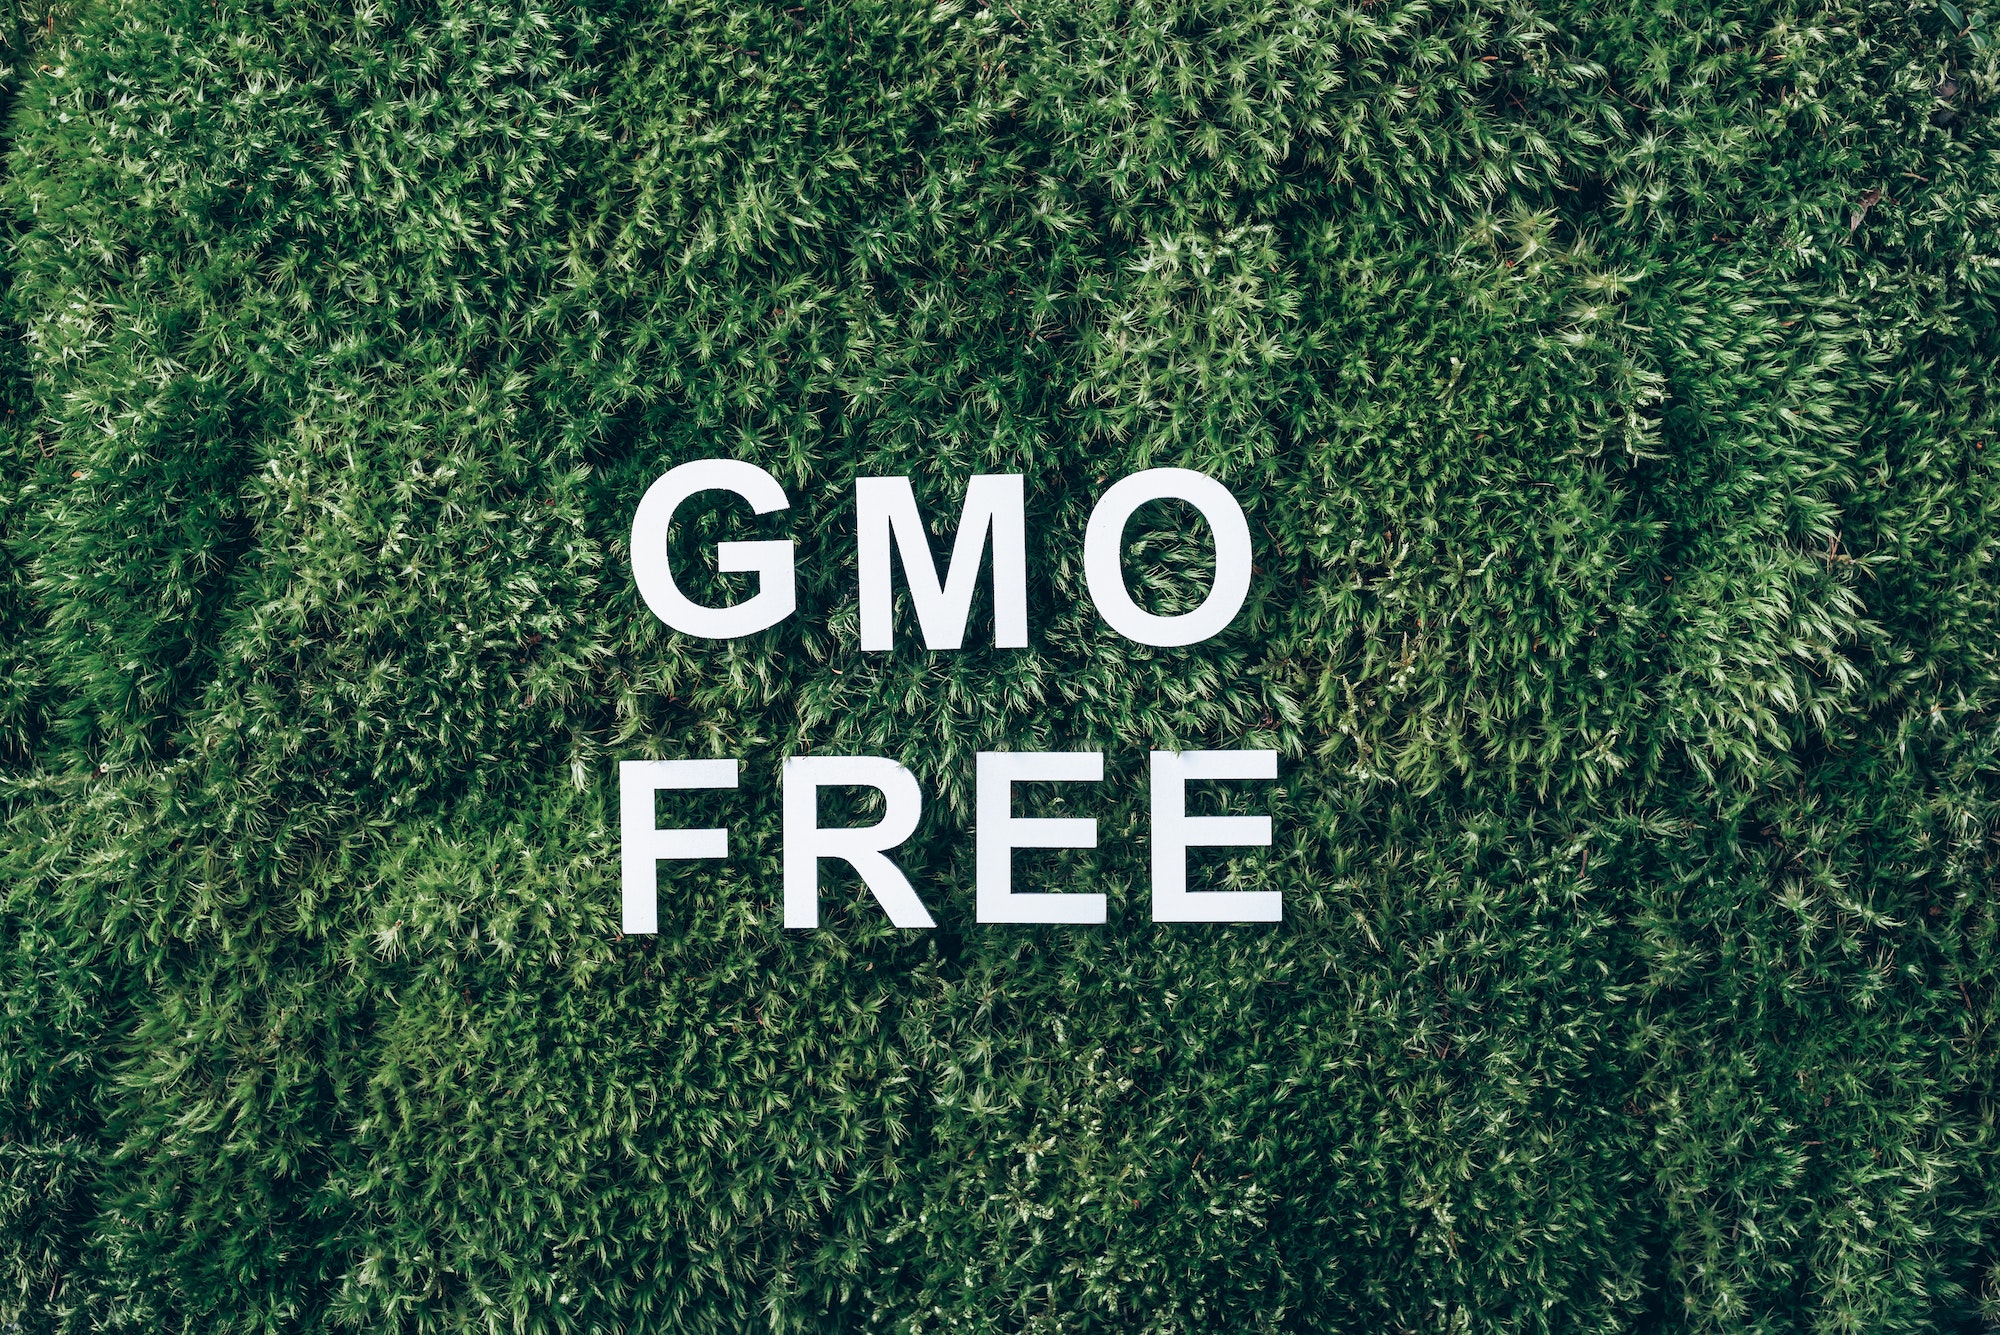 Inscription GMO FREE on moss, green grass background. Healthy diet concept